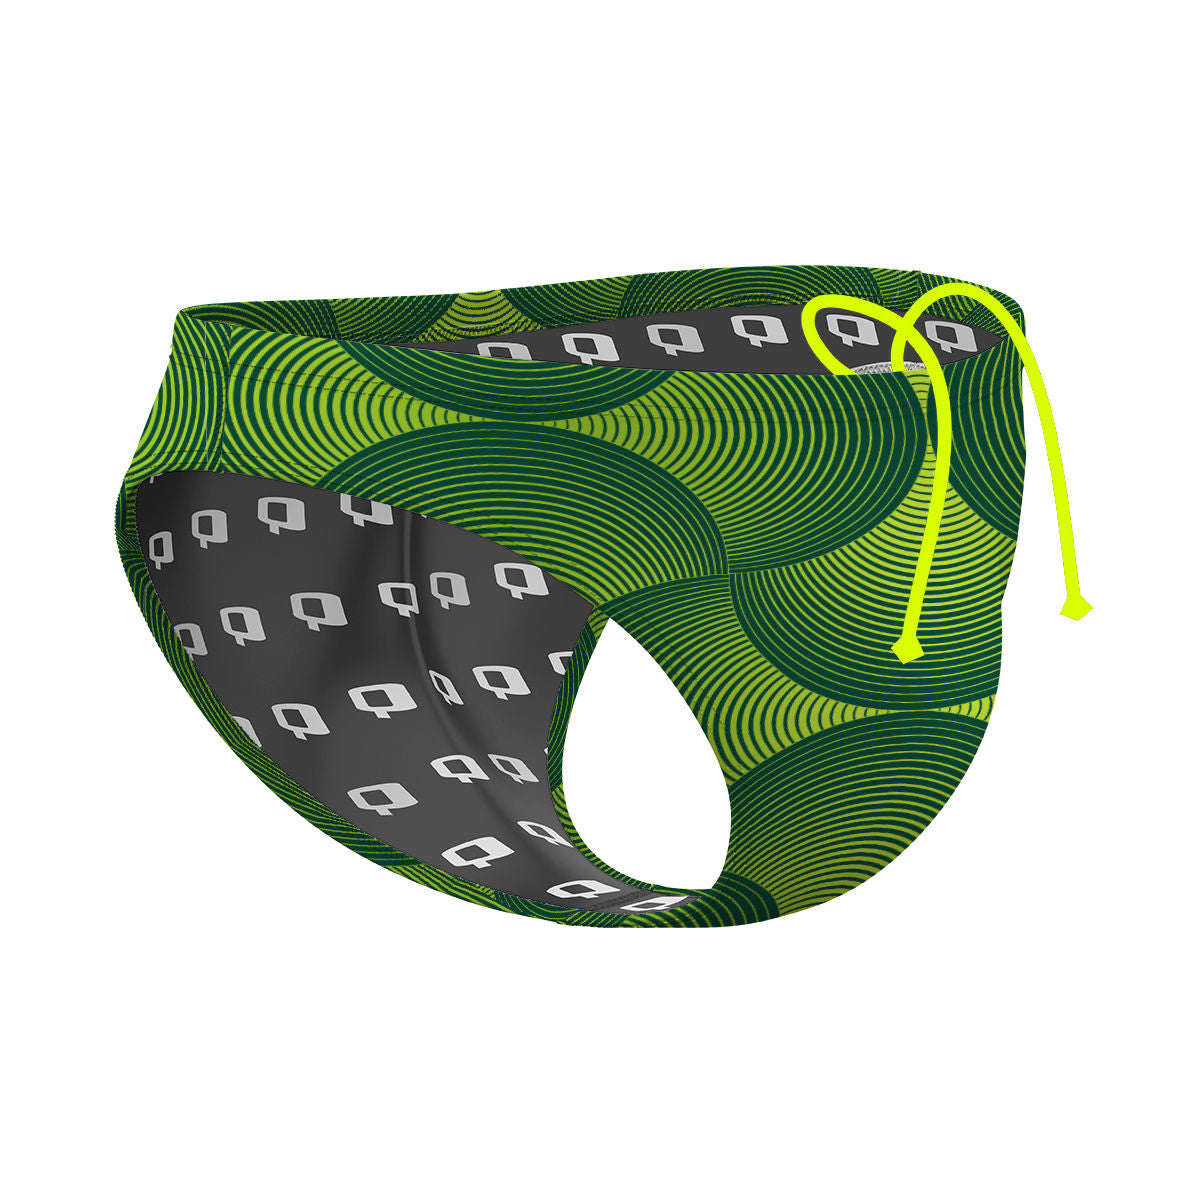 Patter Dots Verde - Waterpolo Brief